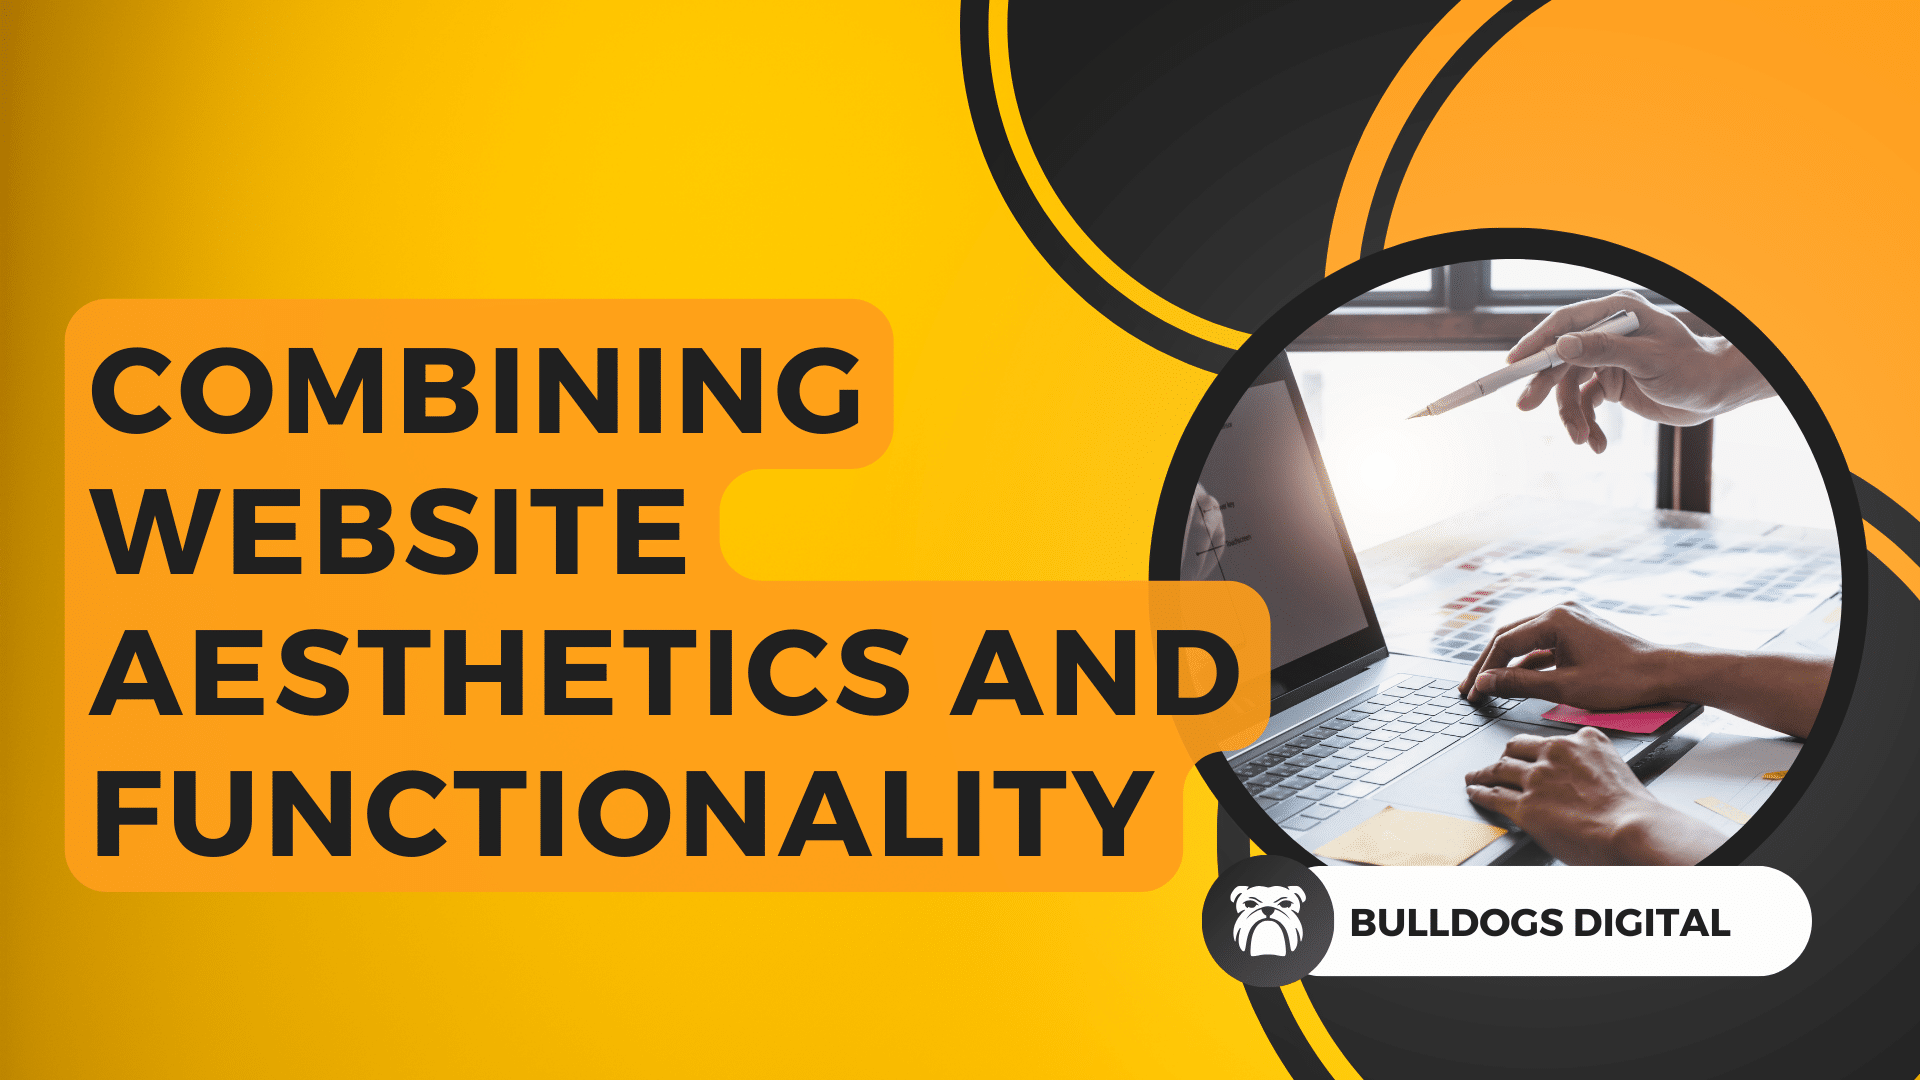 Bold dark text saying "Combining Website Aesthetics and Functionality" on a yellow background with several other circles in the company's signature colours, White, Black and orange. Featuring Bulldogs Digital logo, a bulldog Bulldogs Digital Website Design and Photography Sussex